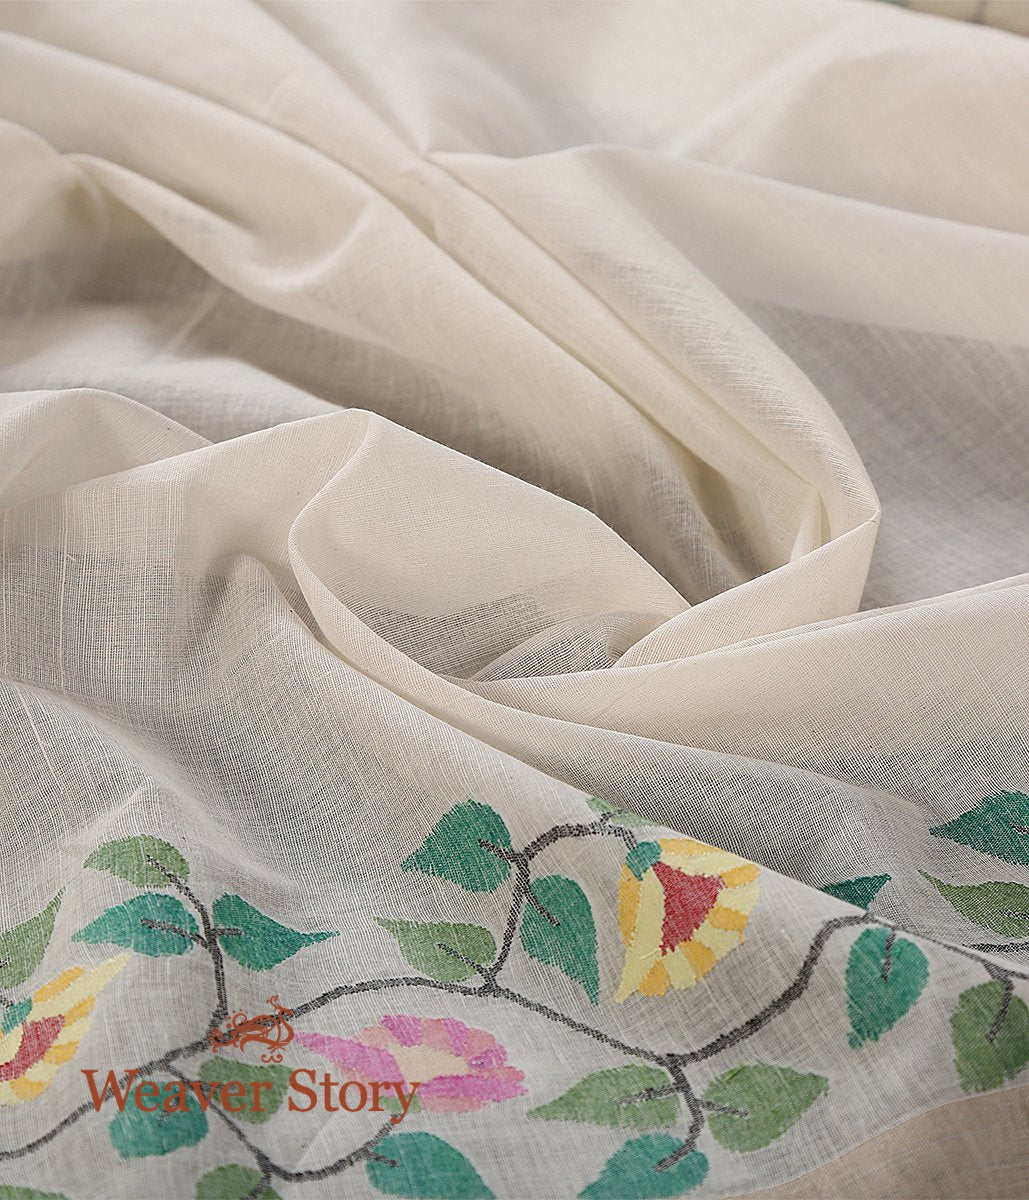 Handwoven_and_Handspun_Cotton_Jamdani_Saree_in_Offwhite_with_all_over_Floral_Jaal_WeaverStory_05